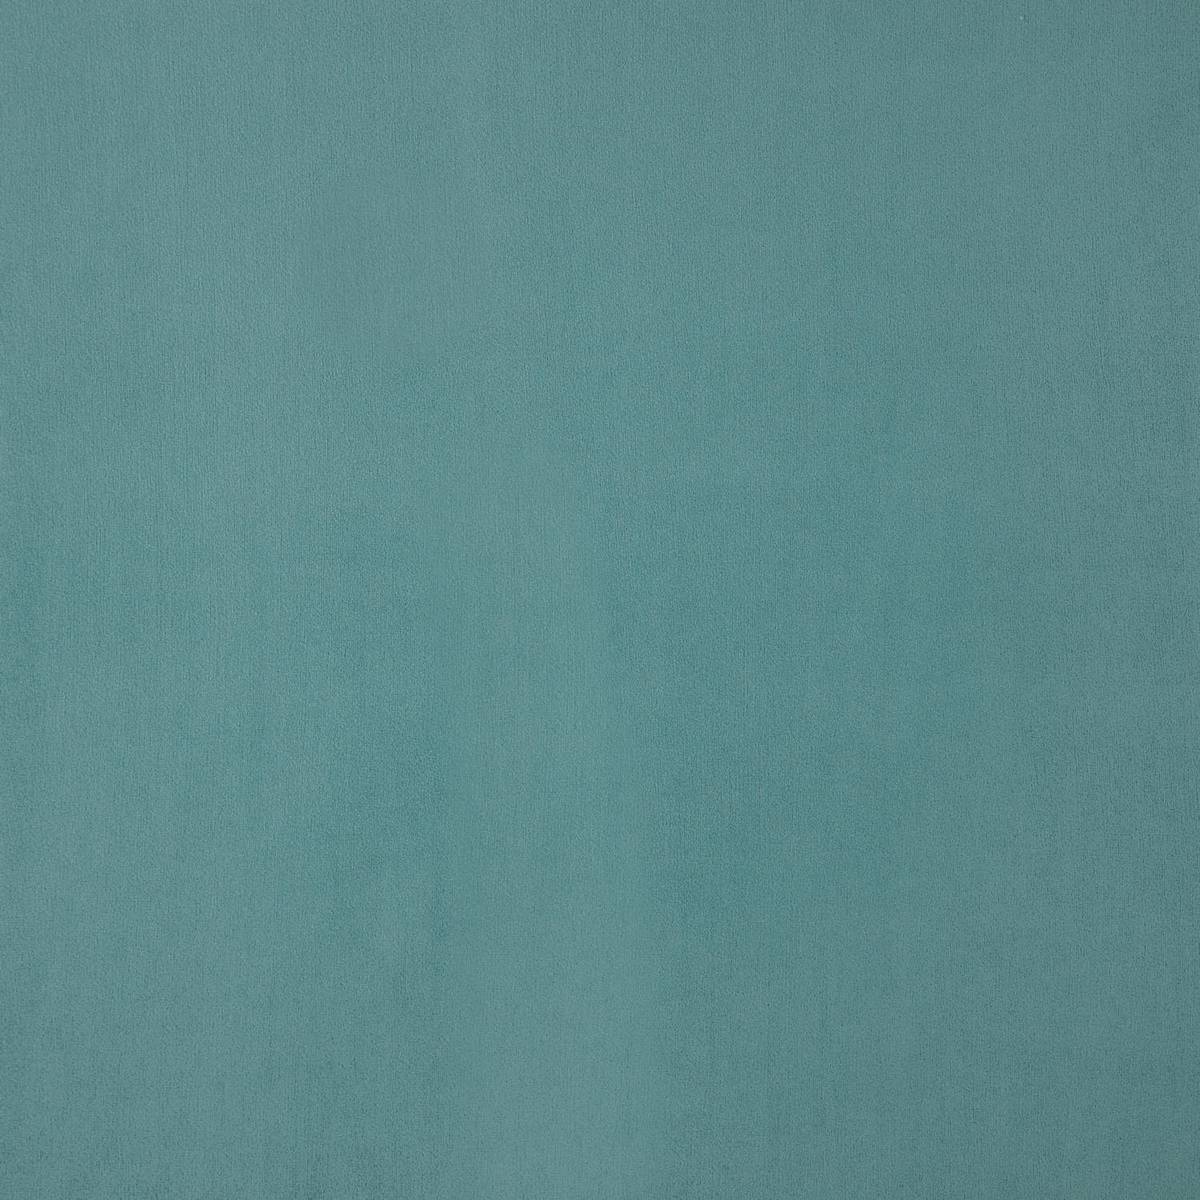 Entity Plains Teal Fabric by Harlequin